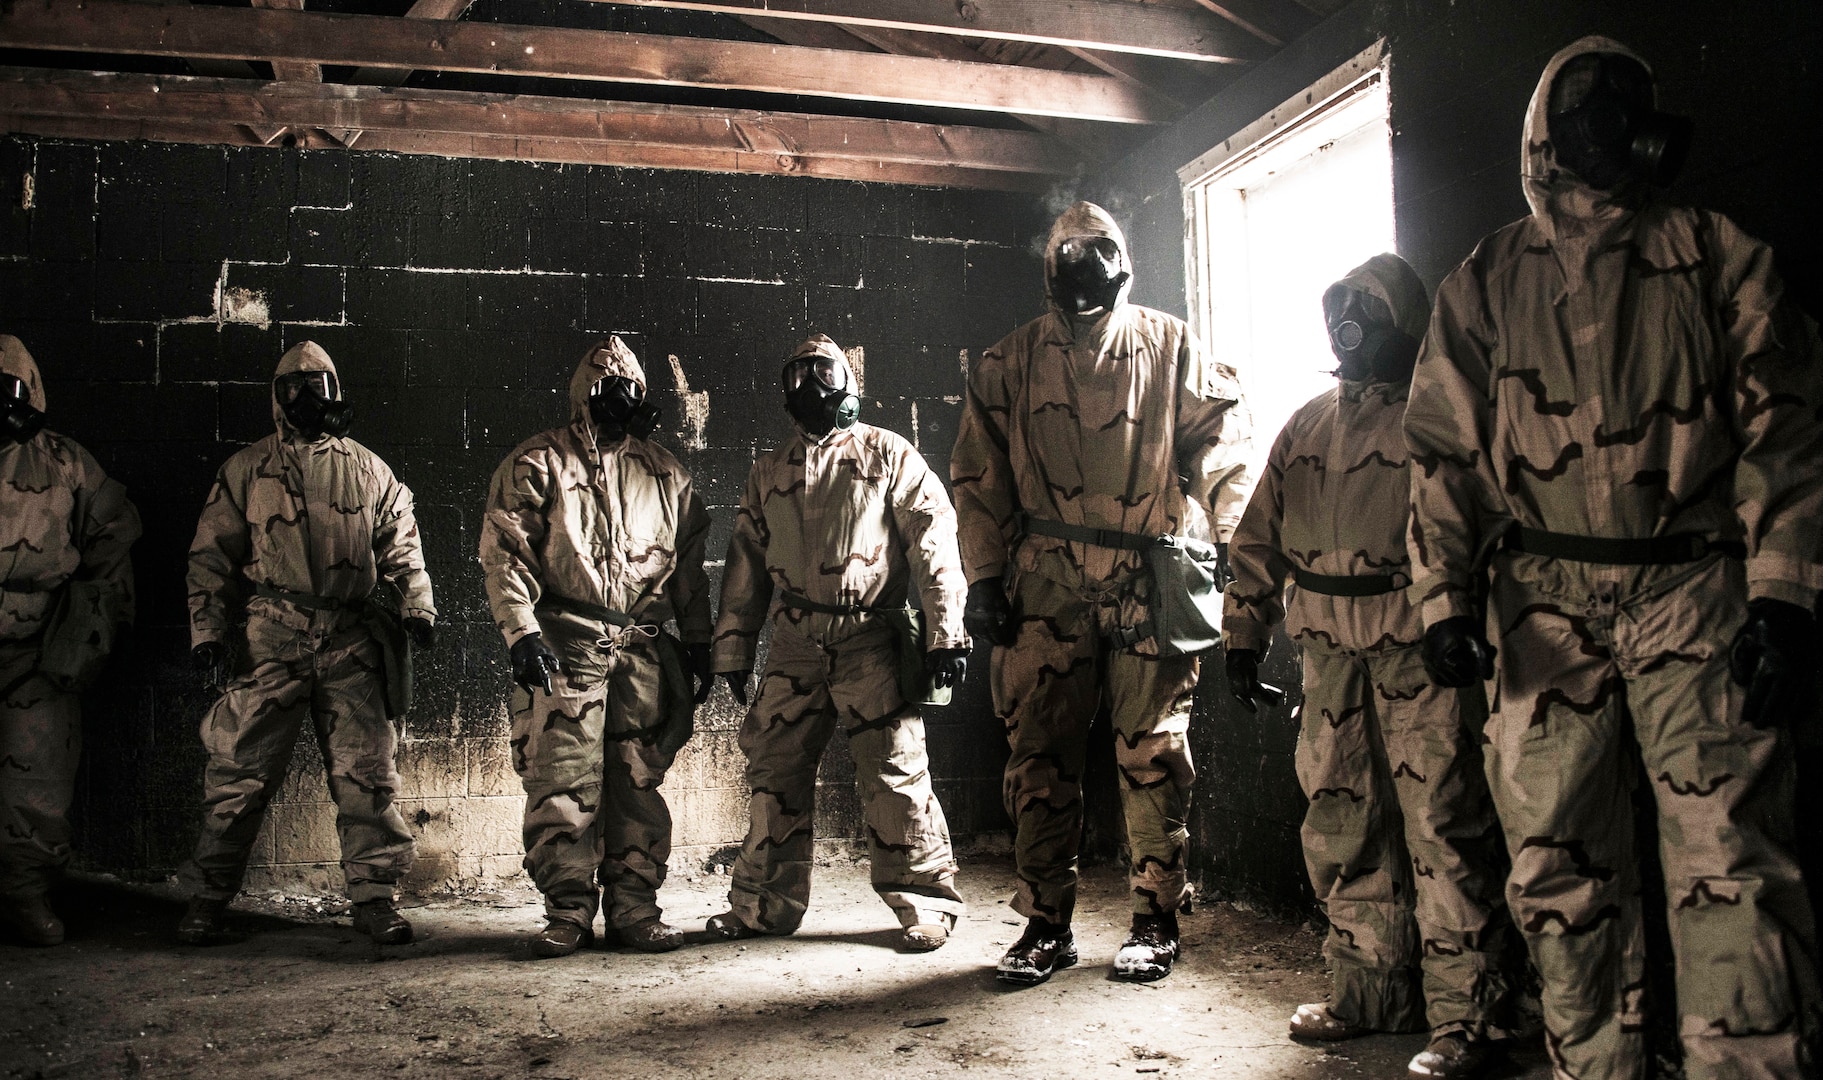 Members of DLA’s rapid deployment Red Team brave the gas chamber to conduct a functions test on personal protective equipment during nuclear, biological and chemical training at Camp Atterbury, Indiana.